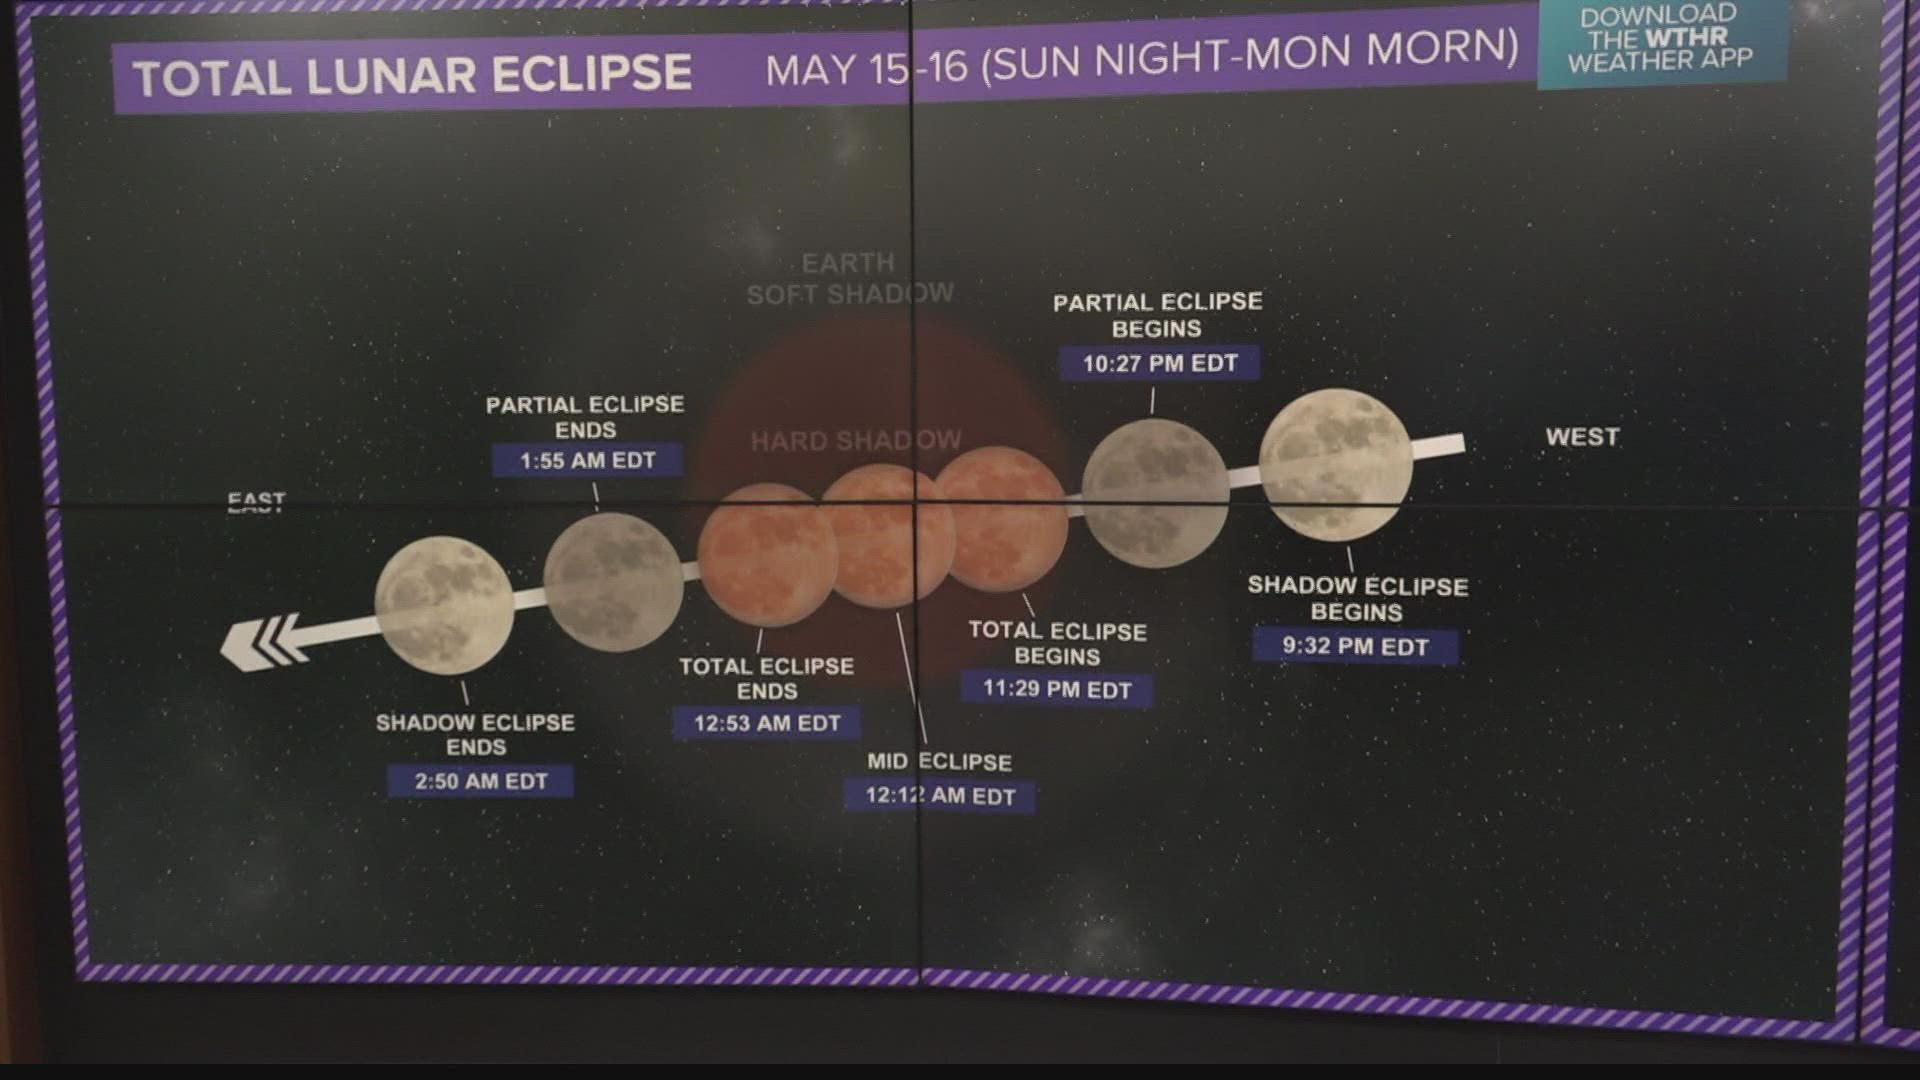 Angela has the details on how you can check out the total lunar eclipse.